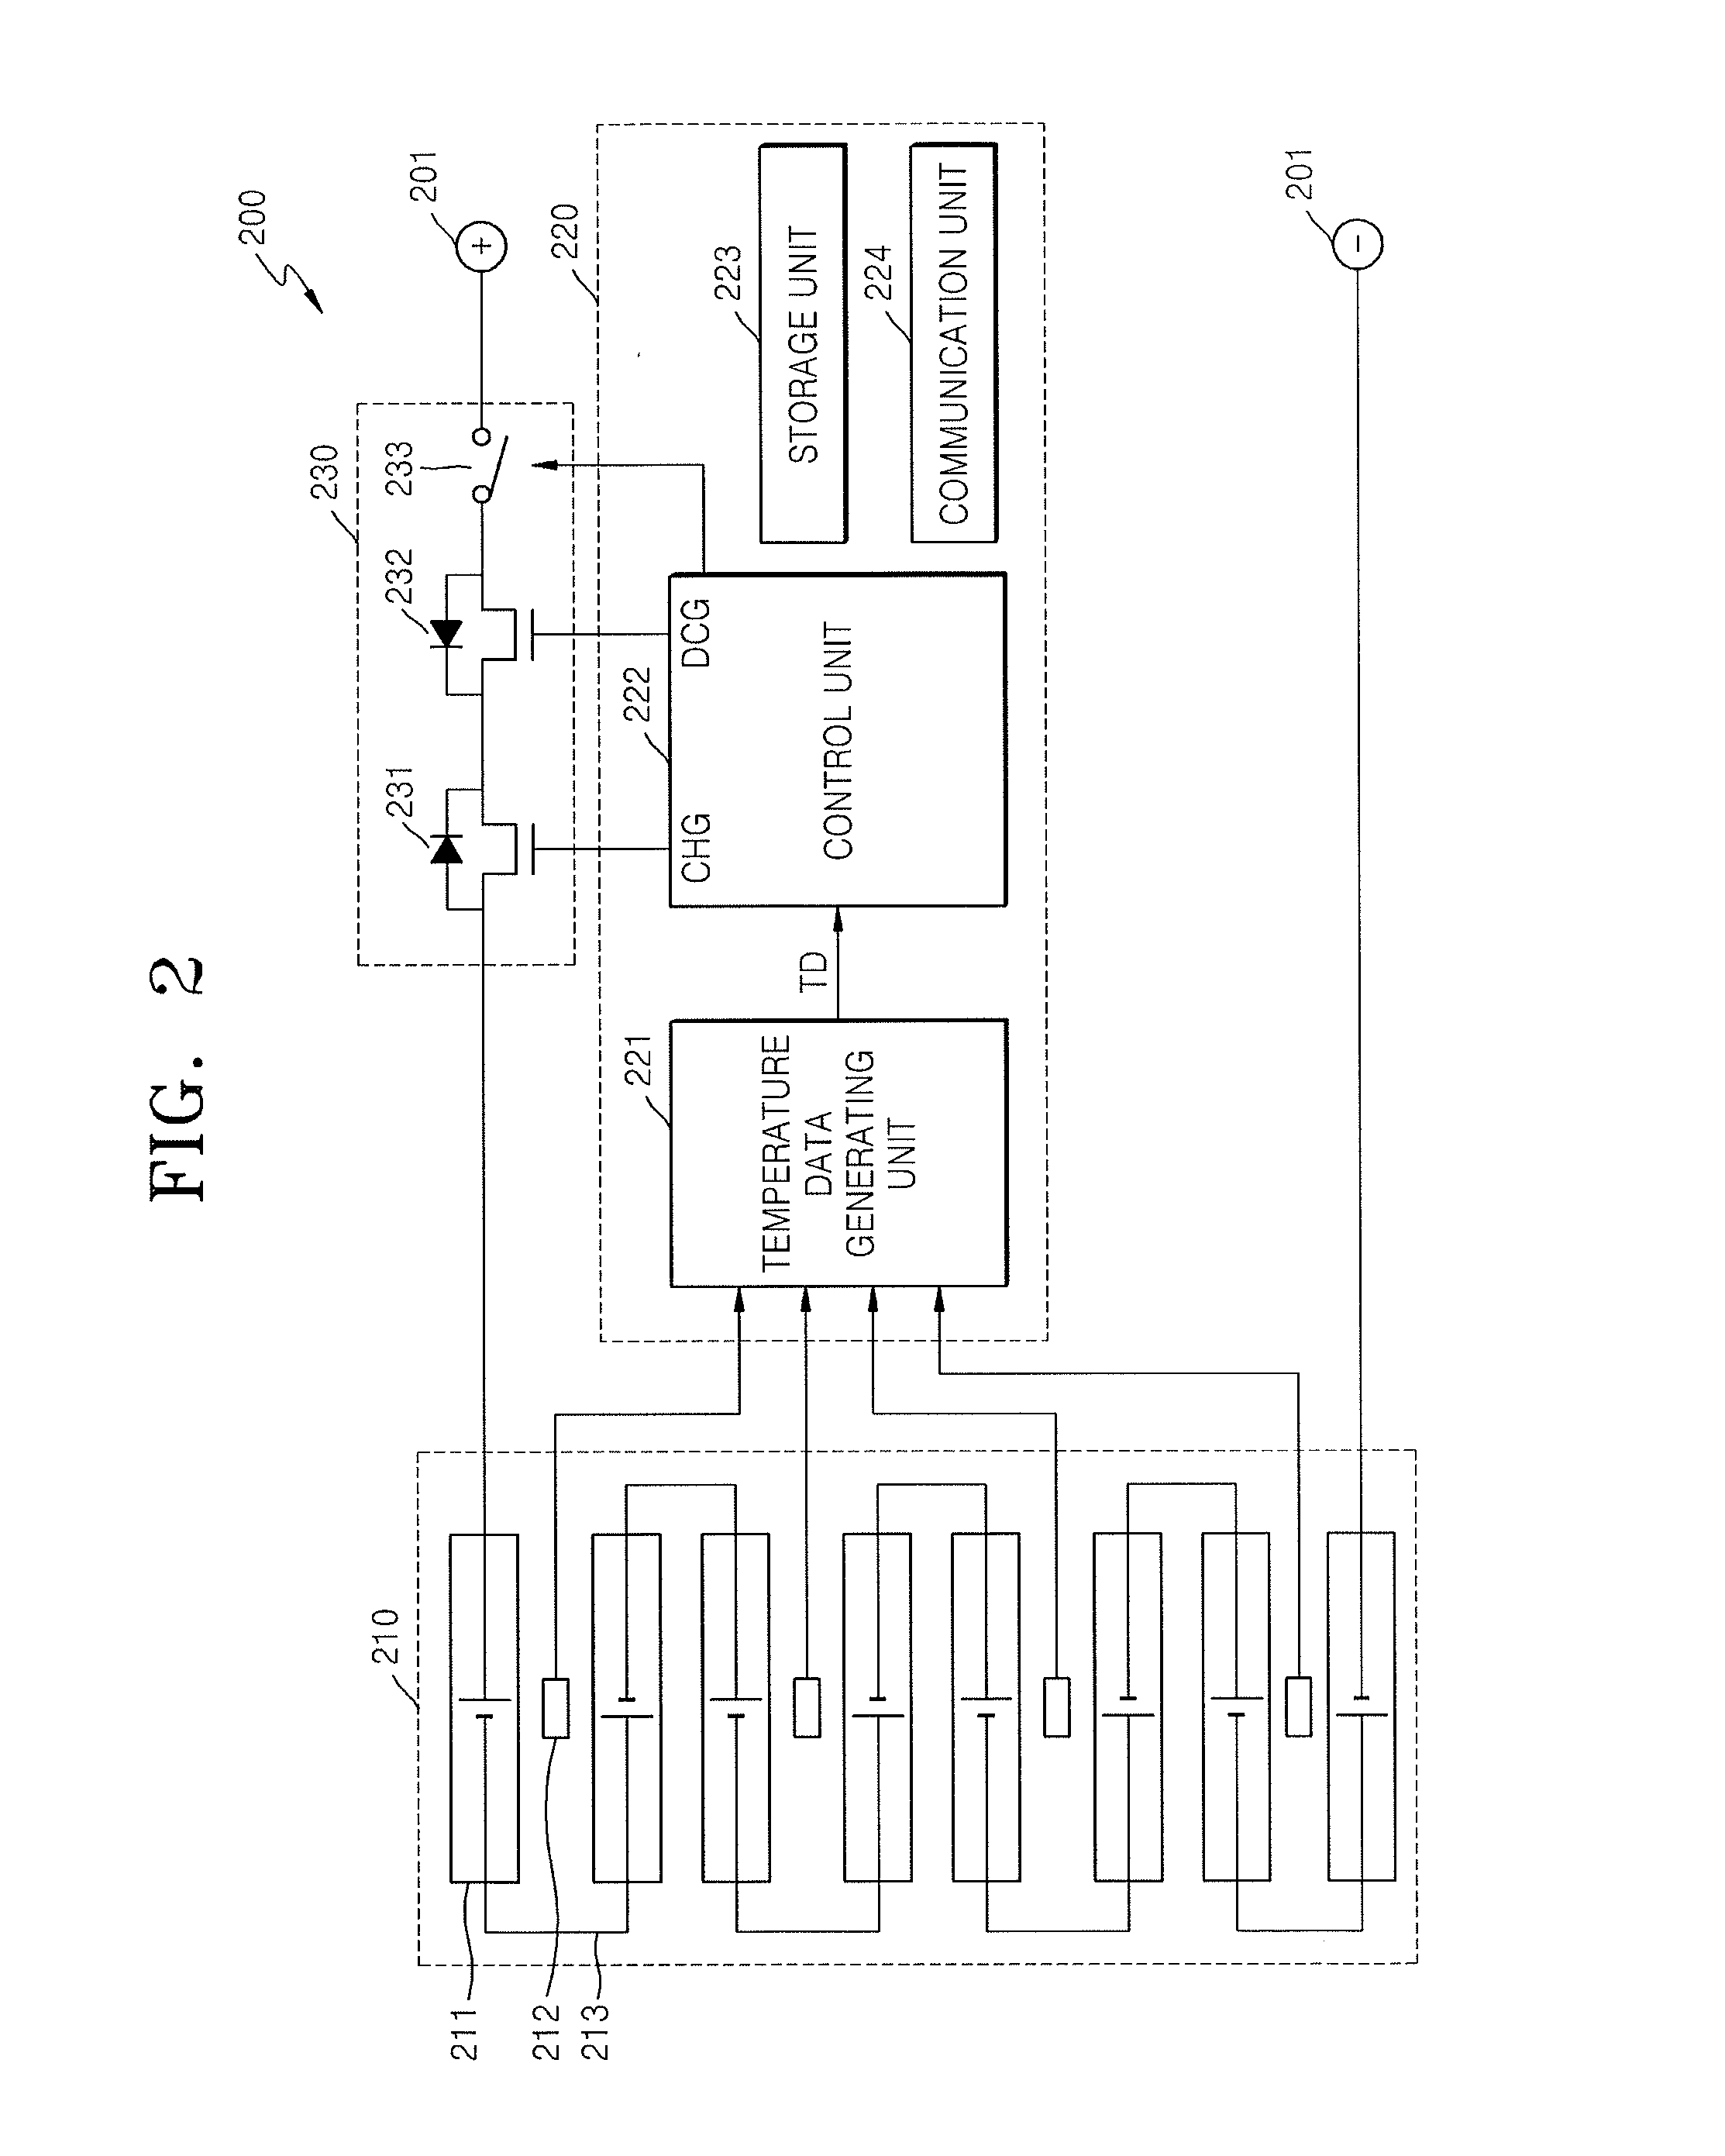 Battery pack, apparatus including battery pack, and method of managing battery pack